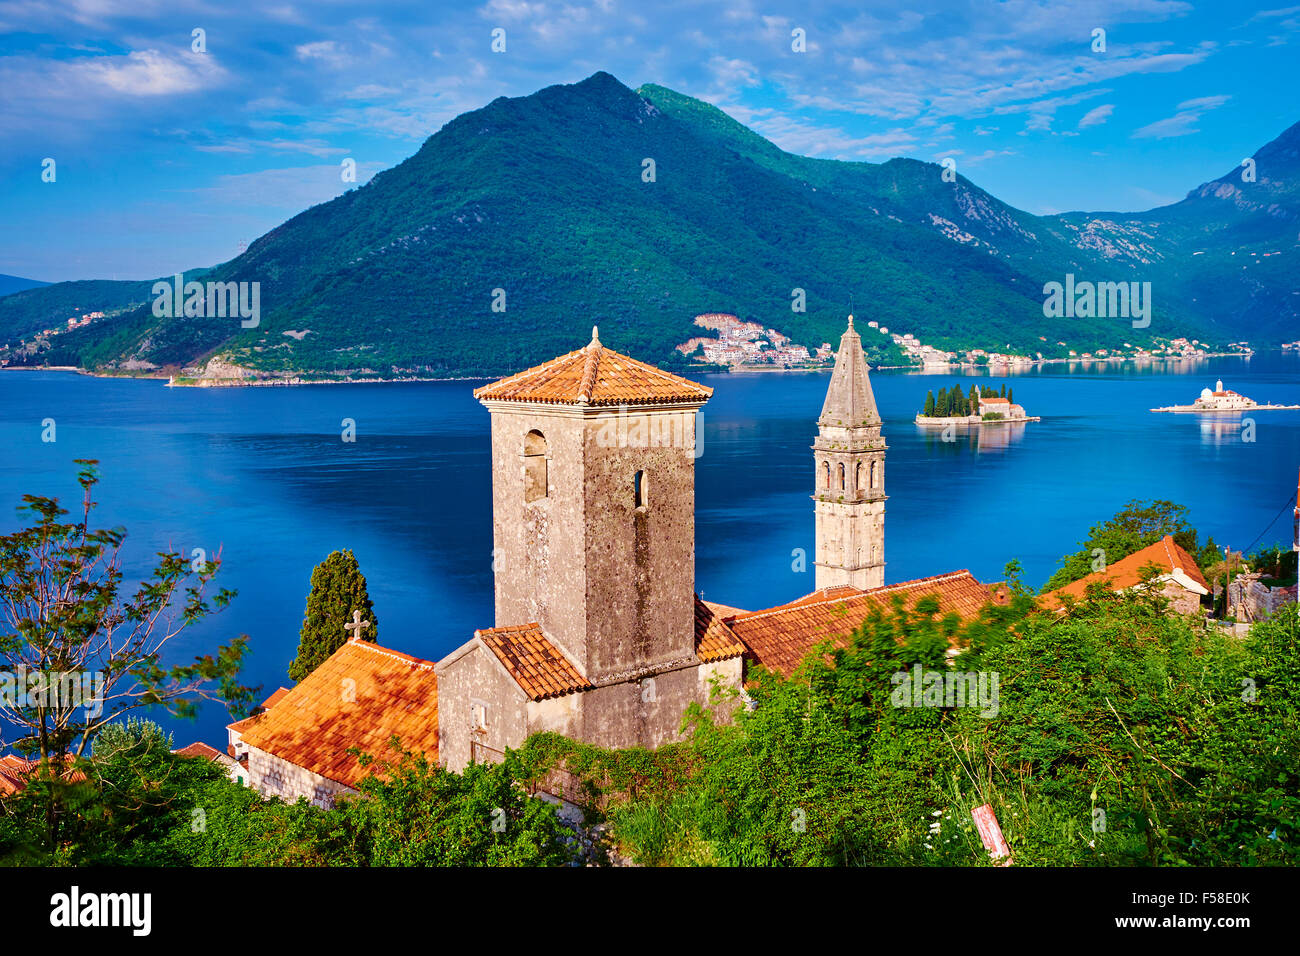 Montenegro, Adriatic coast, Bay of Kotor, Kotor, village of Perast, church tower, Island of St. George and Our Lady of the Rock  Stock Photo